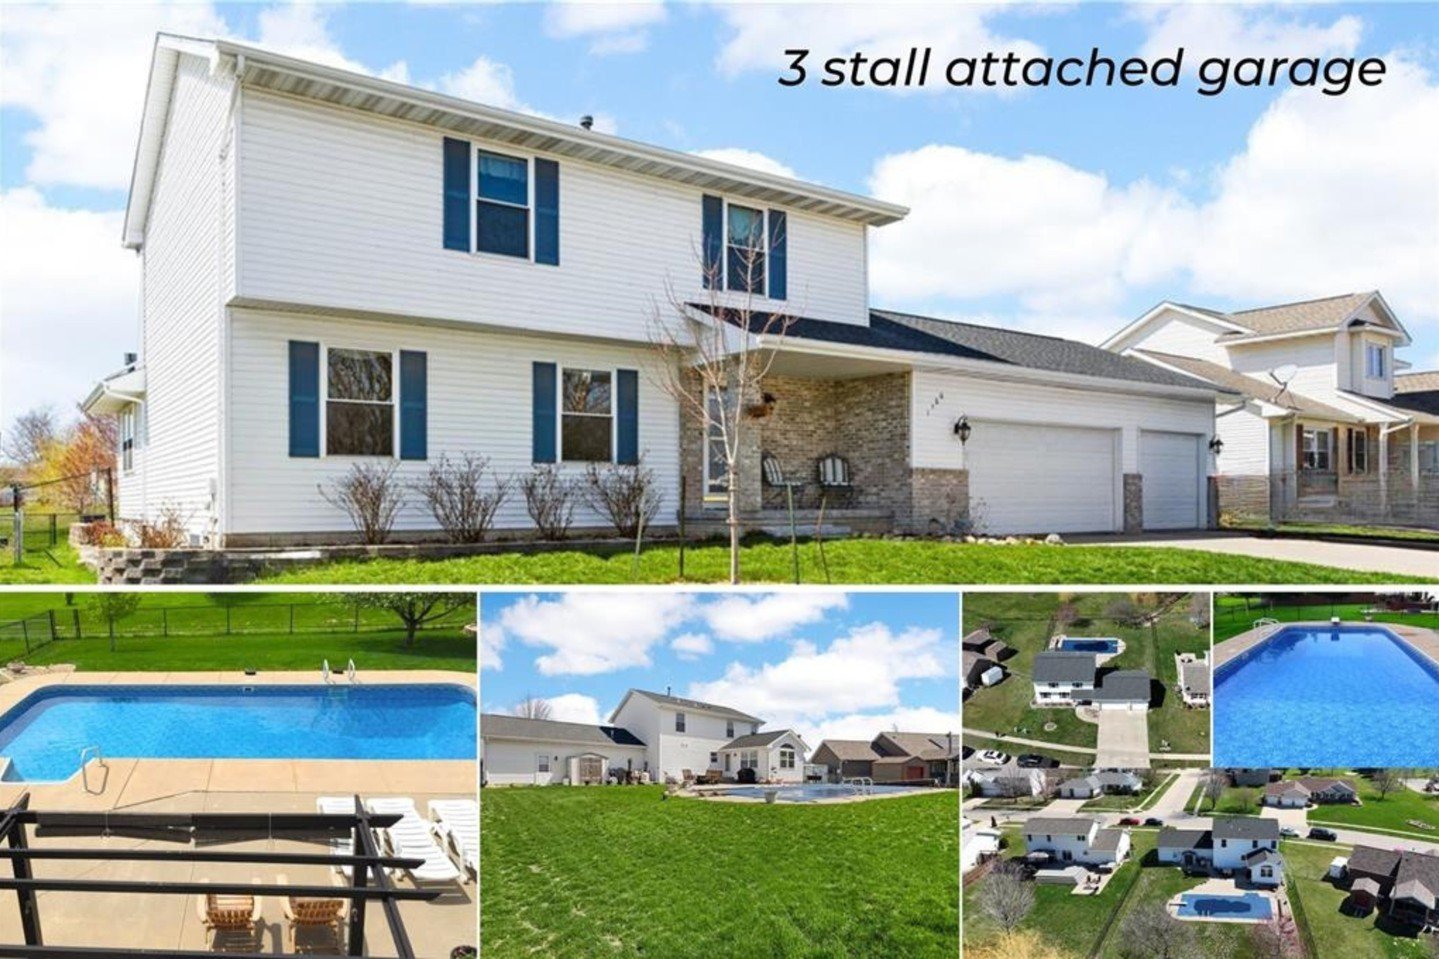 FOR SALE in Marion, Iowa! 🏠
🗓️ 4-26-2024
📫 Located at 1780 Geode Street, Marion 
💰 $375,000
🛏️ 4 Bedrooms
🛁 3.75 Baths
🚗 3 Car Attached Garage
🏊 Private Pool with Fencing
⚖️ Perfect balance of luxury and comfort
✨ Experience comfortable livin